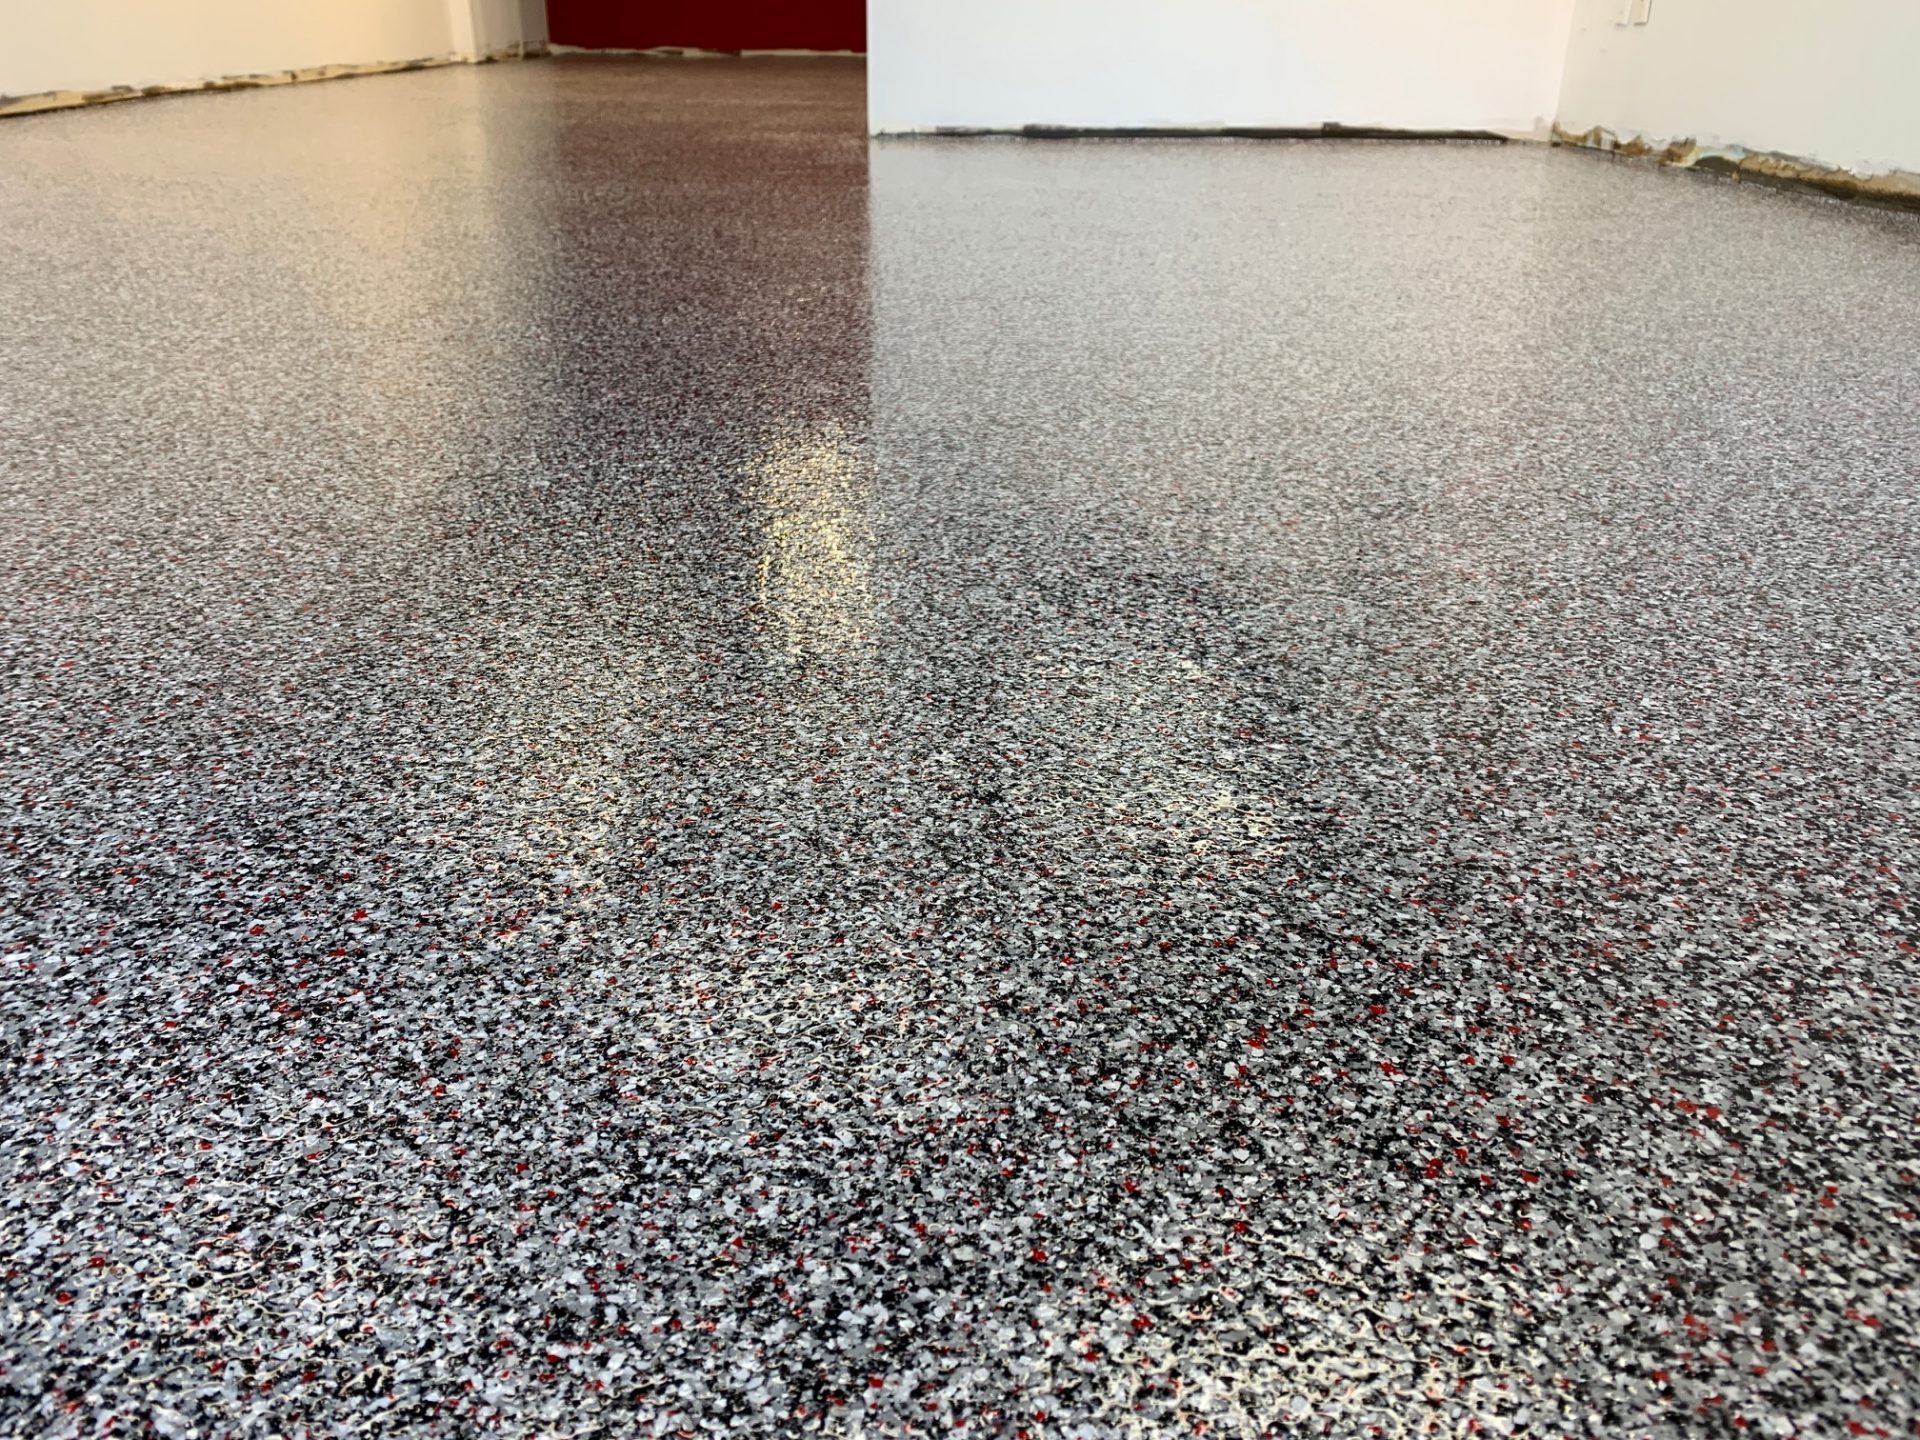 MVP Barbers - BTF Concrete Services - Concrete underlay over existing VCT. Sealed with a poly aspartic chip system.